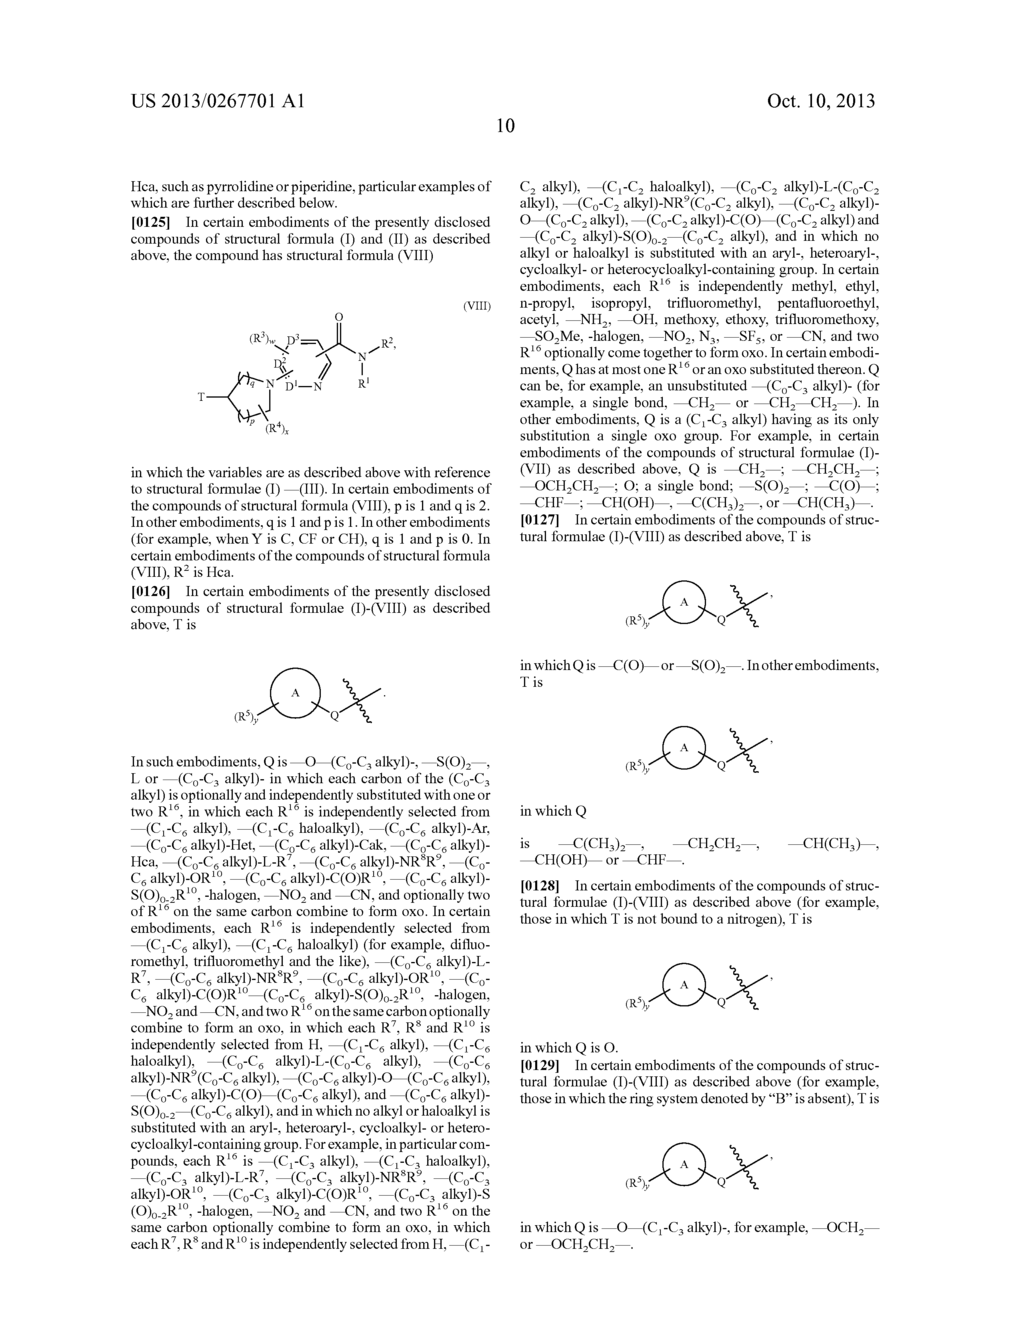 AMPK-ACTIVATING HETEROCYCLIC COMPOUNDS AND METHODS FOR USING THE SAME - diagram, schematic, and image 11